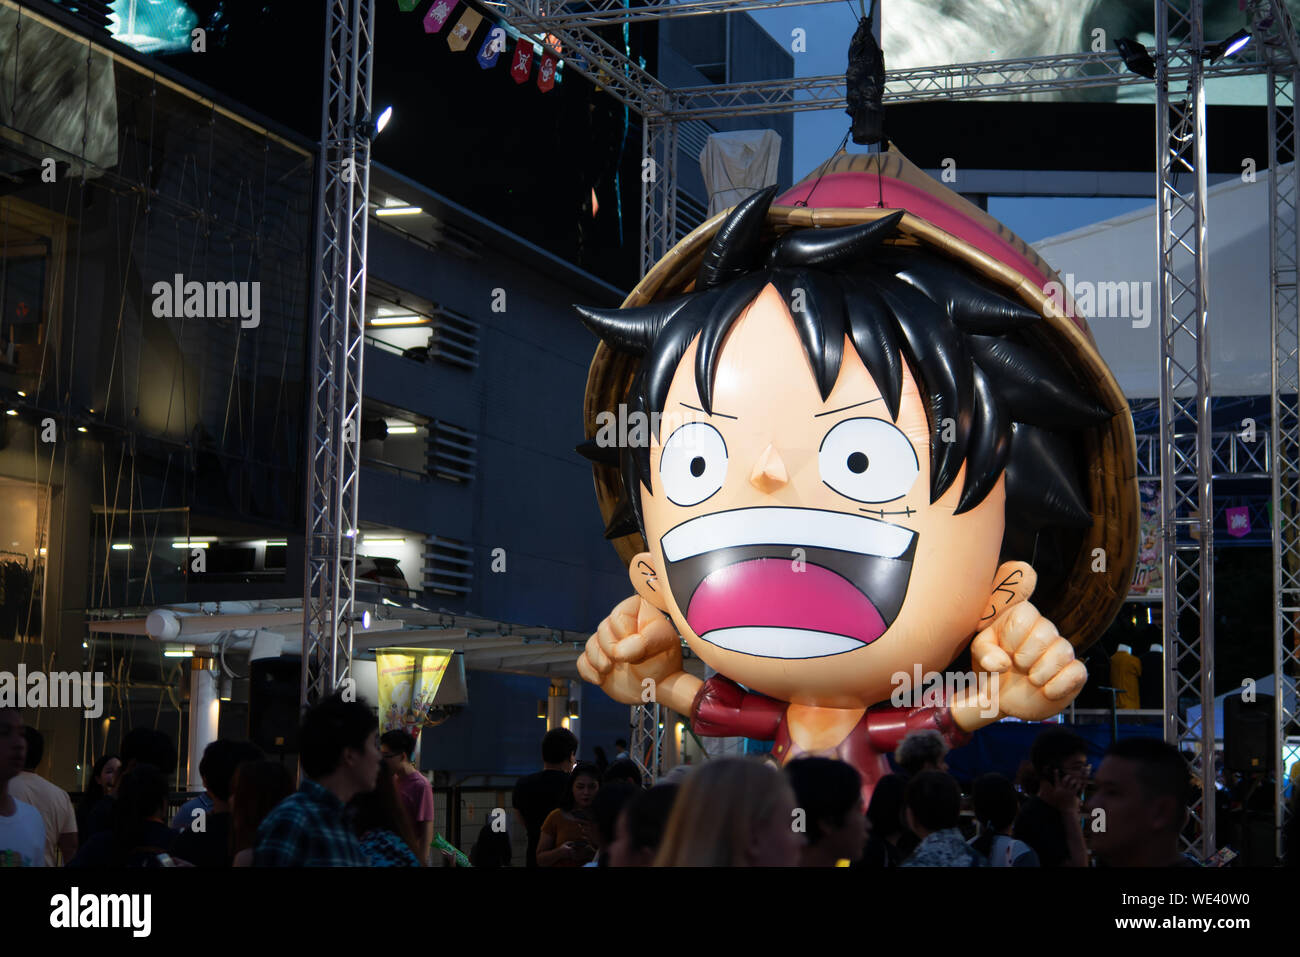 Bangkok, Thailand - August 18, 2019 : Inflatable of Monkey D. Luffy, a fictional character of One Piece manga series, at the One Piece 20th animation Stock Photo